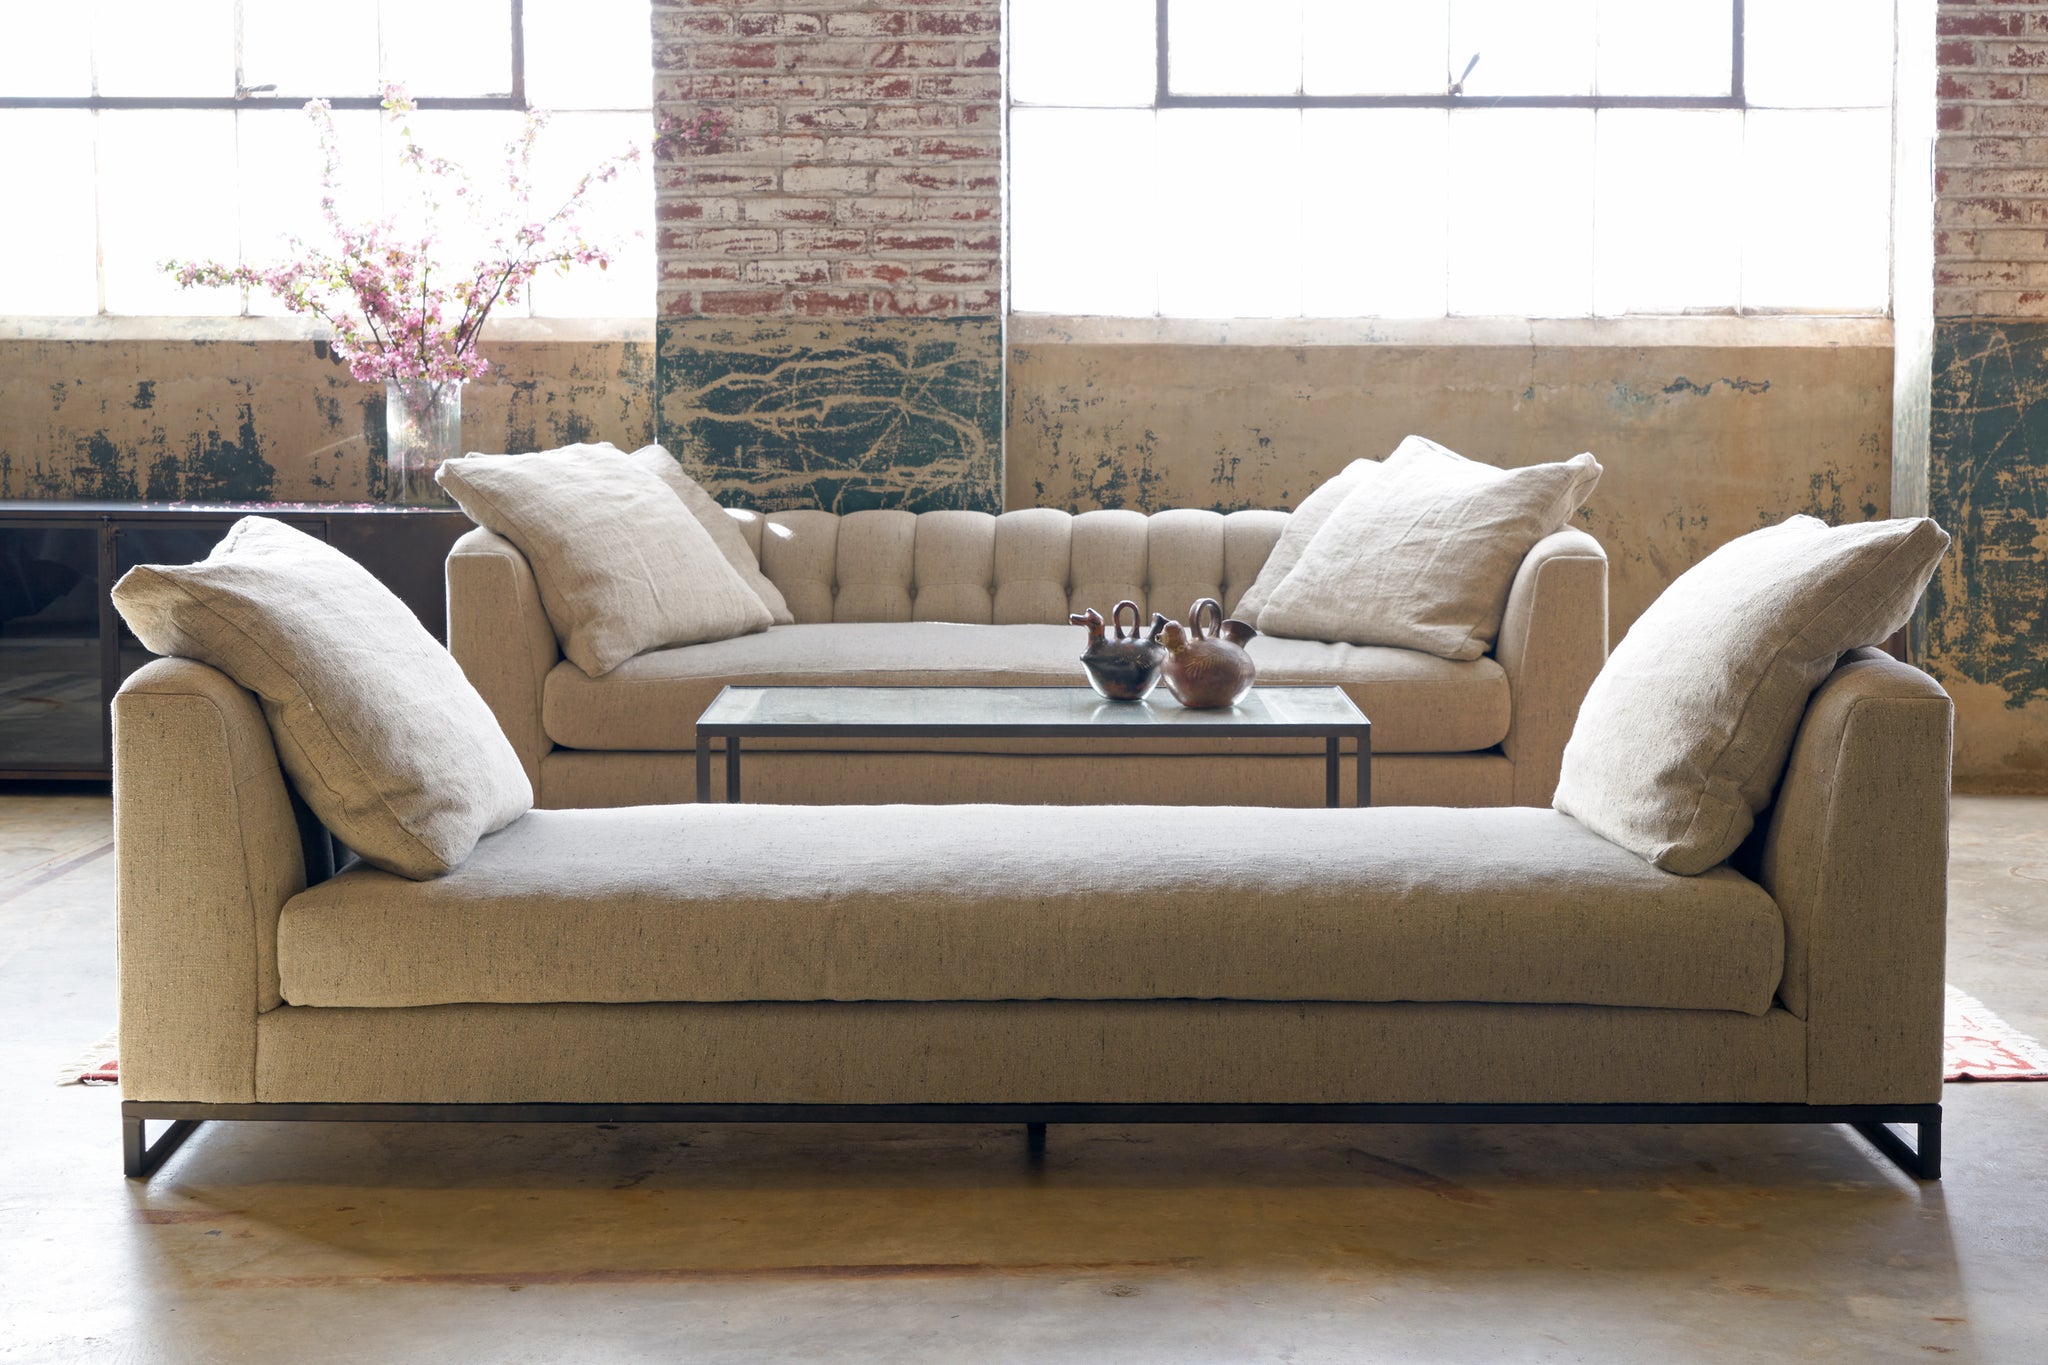  A daybed and a sofa in front of a wall with 2 large windows. Photographed in Andrews Burlap 